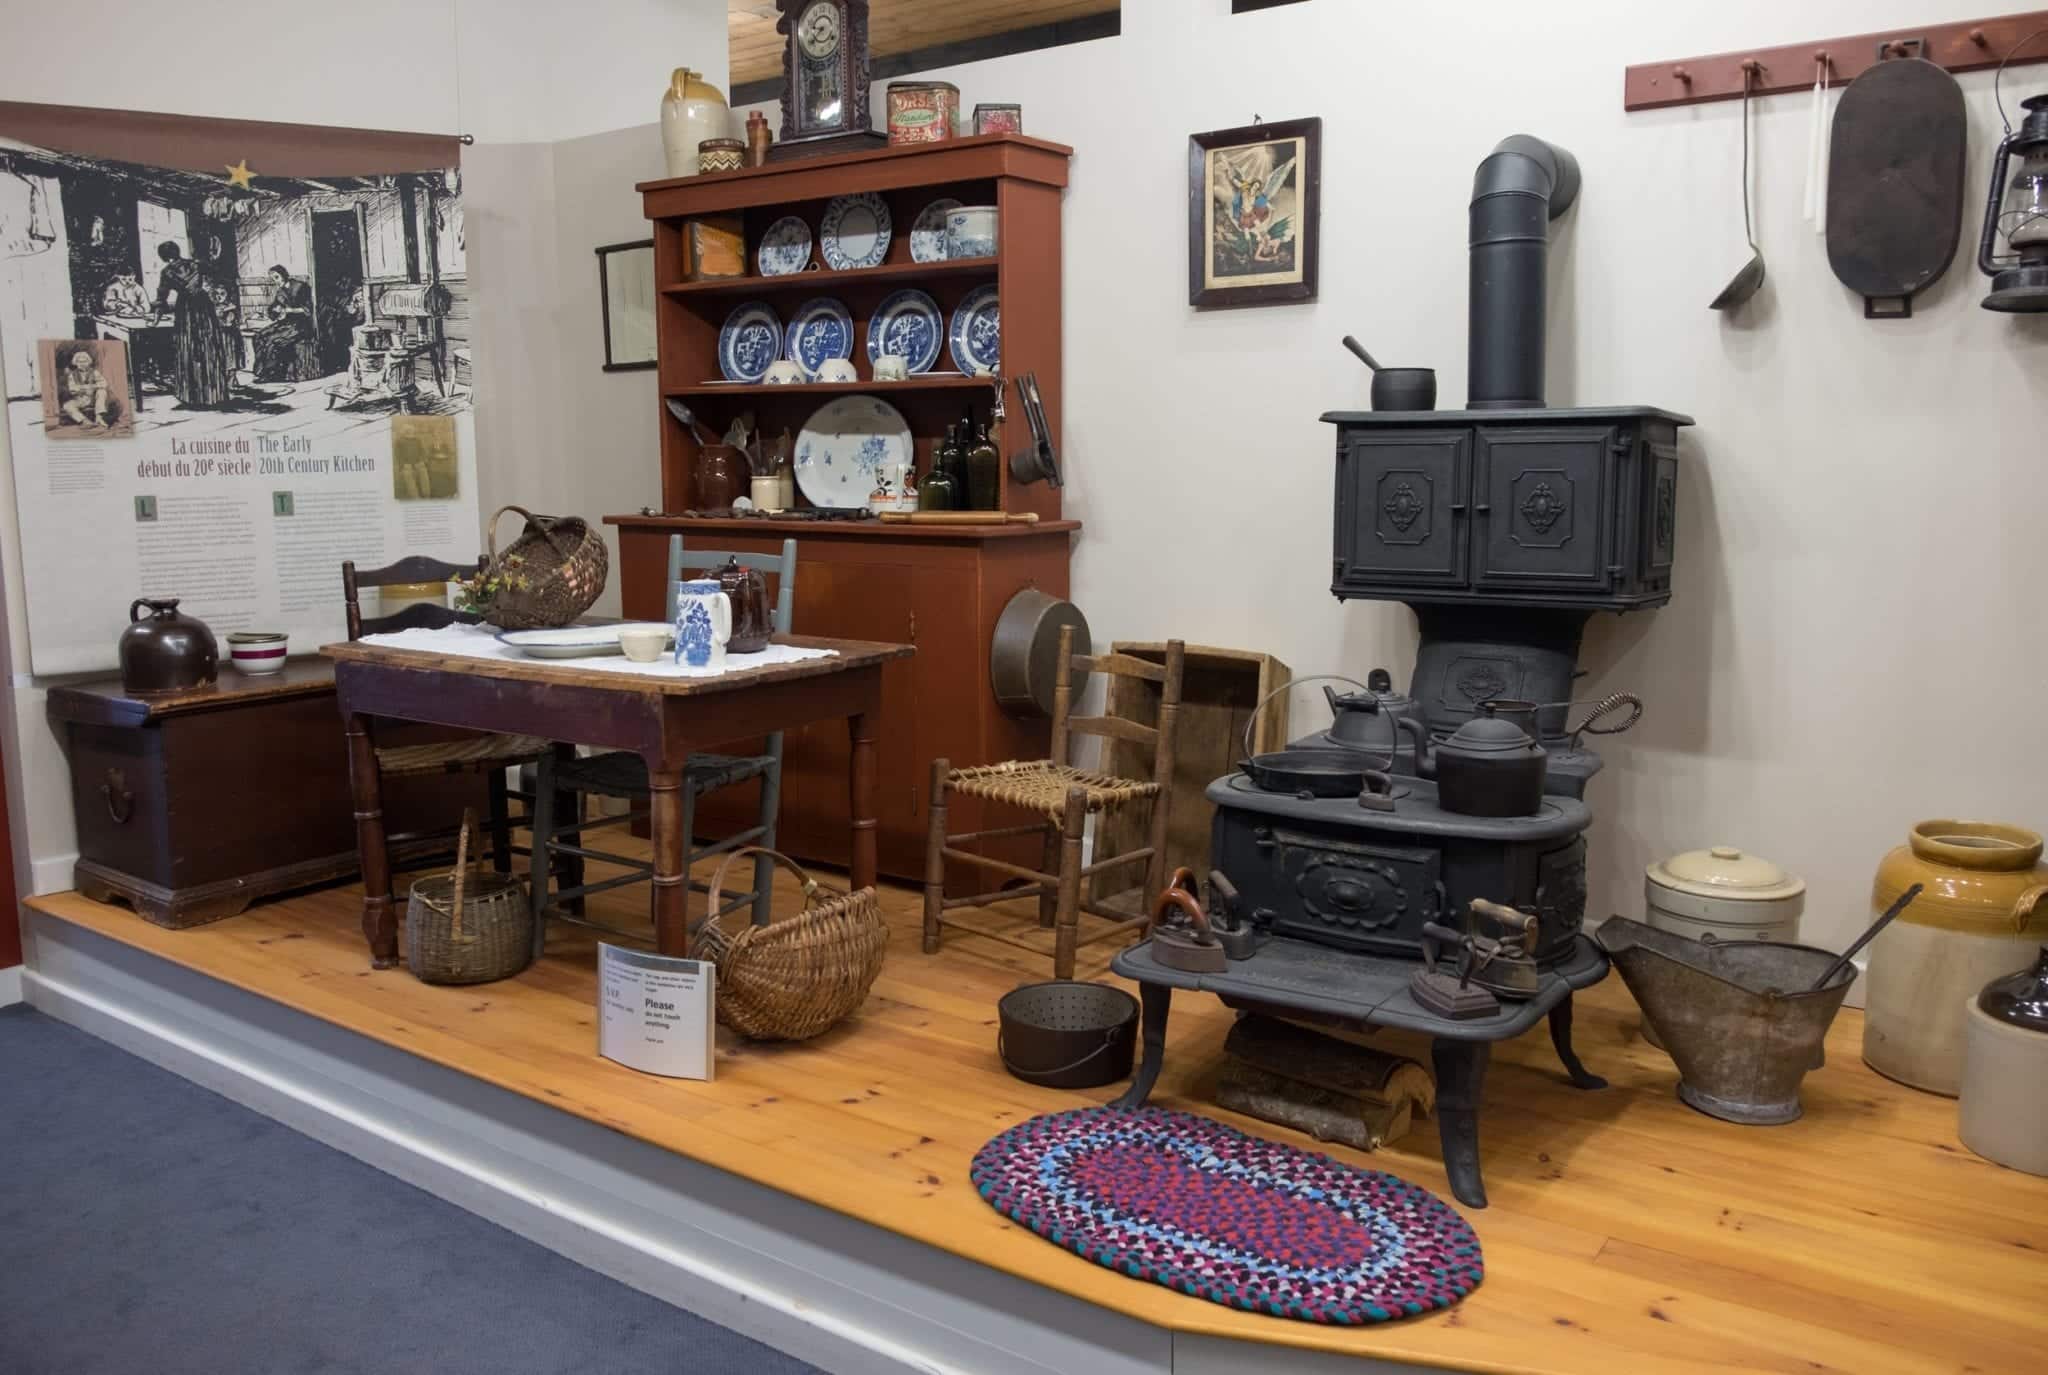 A recreation of an Acadian home at Les Trois Pignons with a china cabinet, wooden dining table, iron stove, and braided rug on the ground.